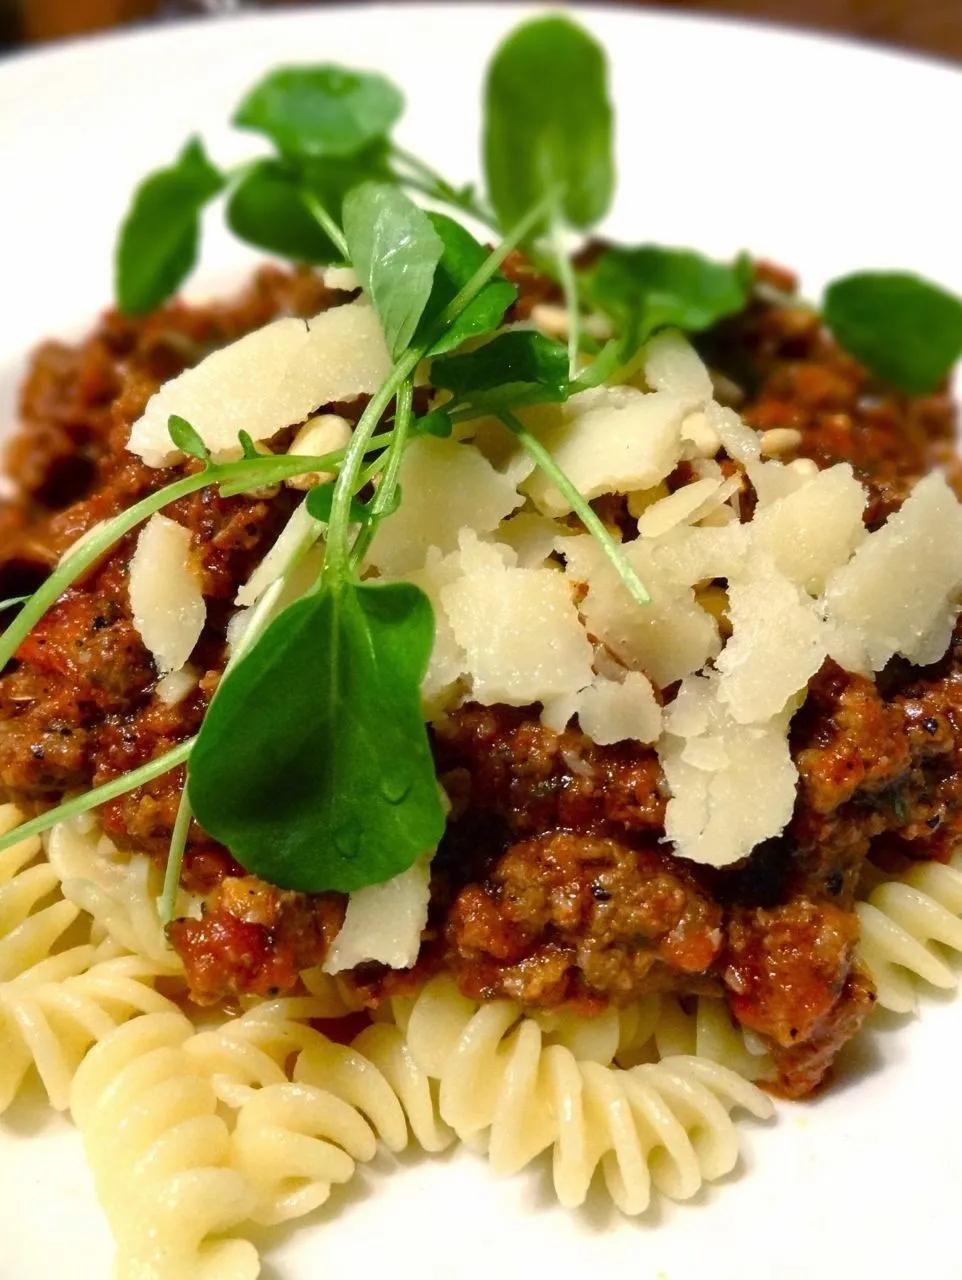 Scrumpdillyicious: Fusilli Bolognese with Beef, Pork, Veal &amp; Sausage